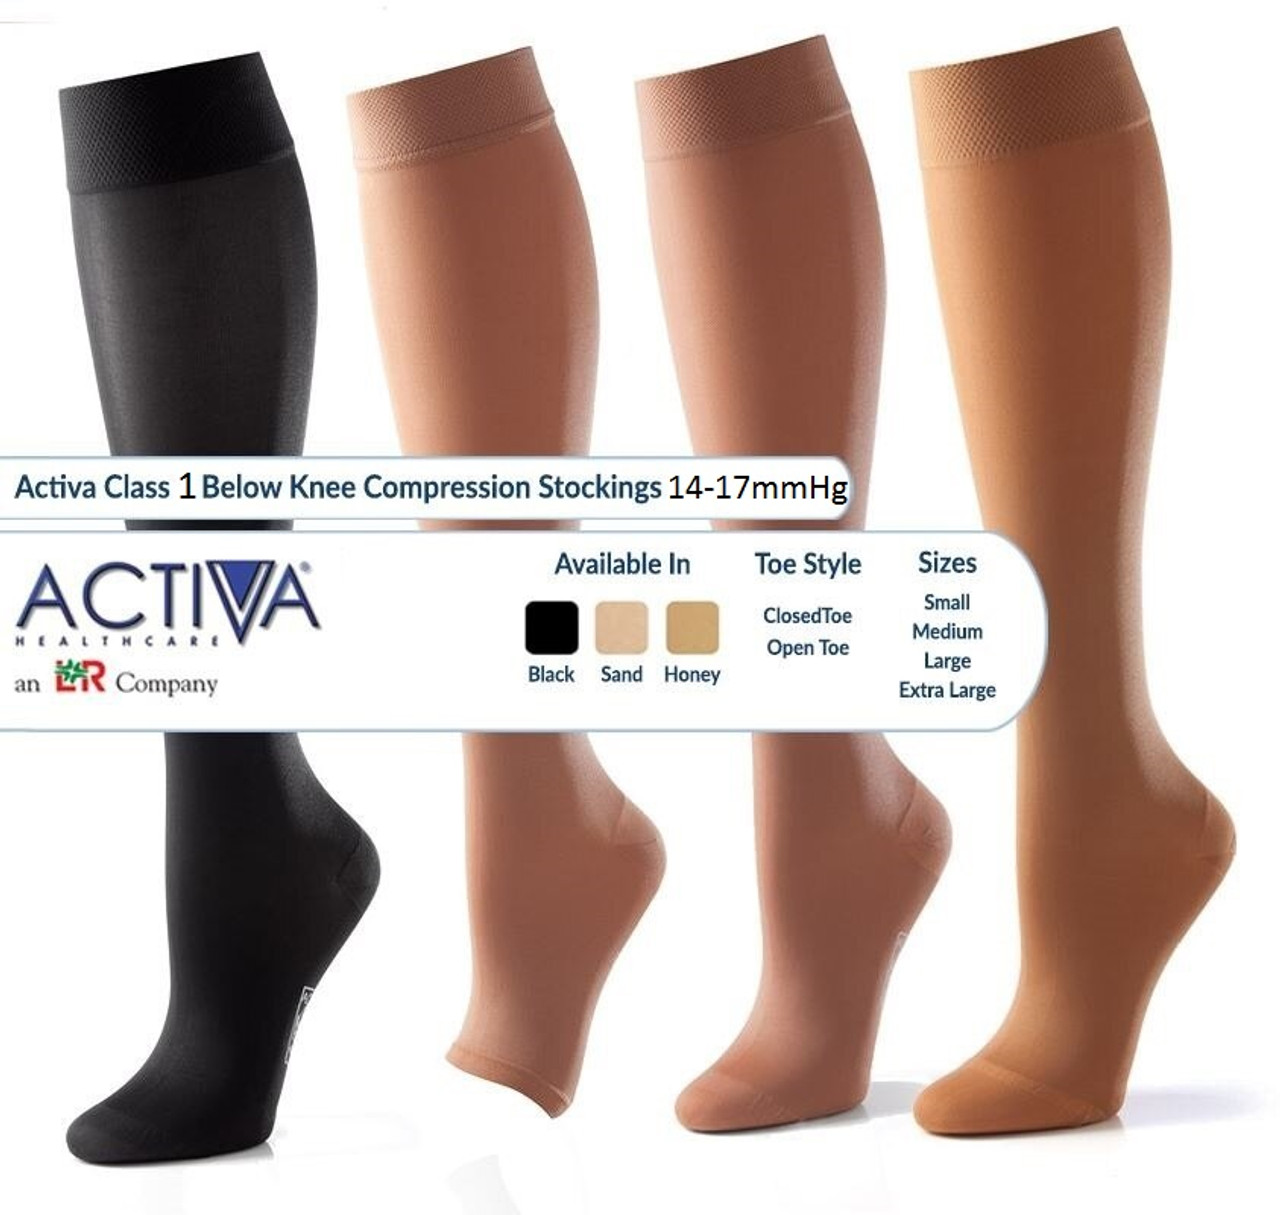 Activa Compression Hosiery Size Chart